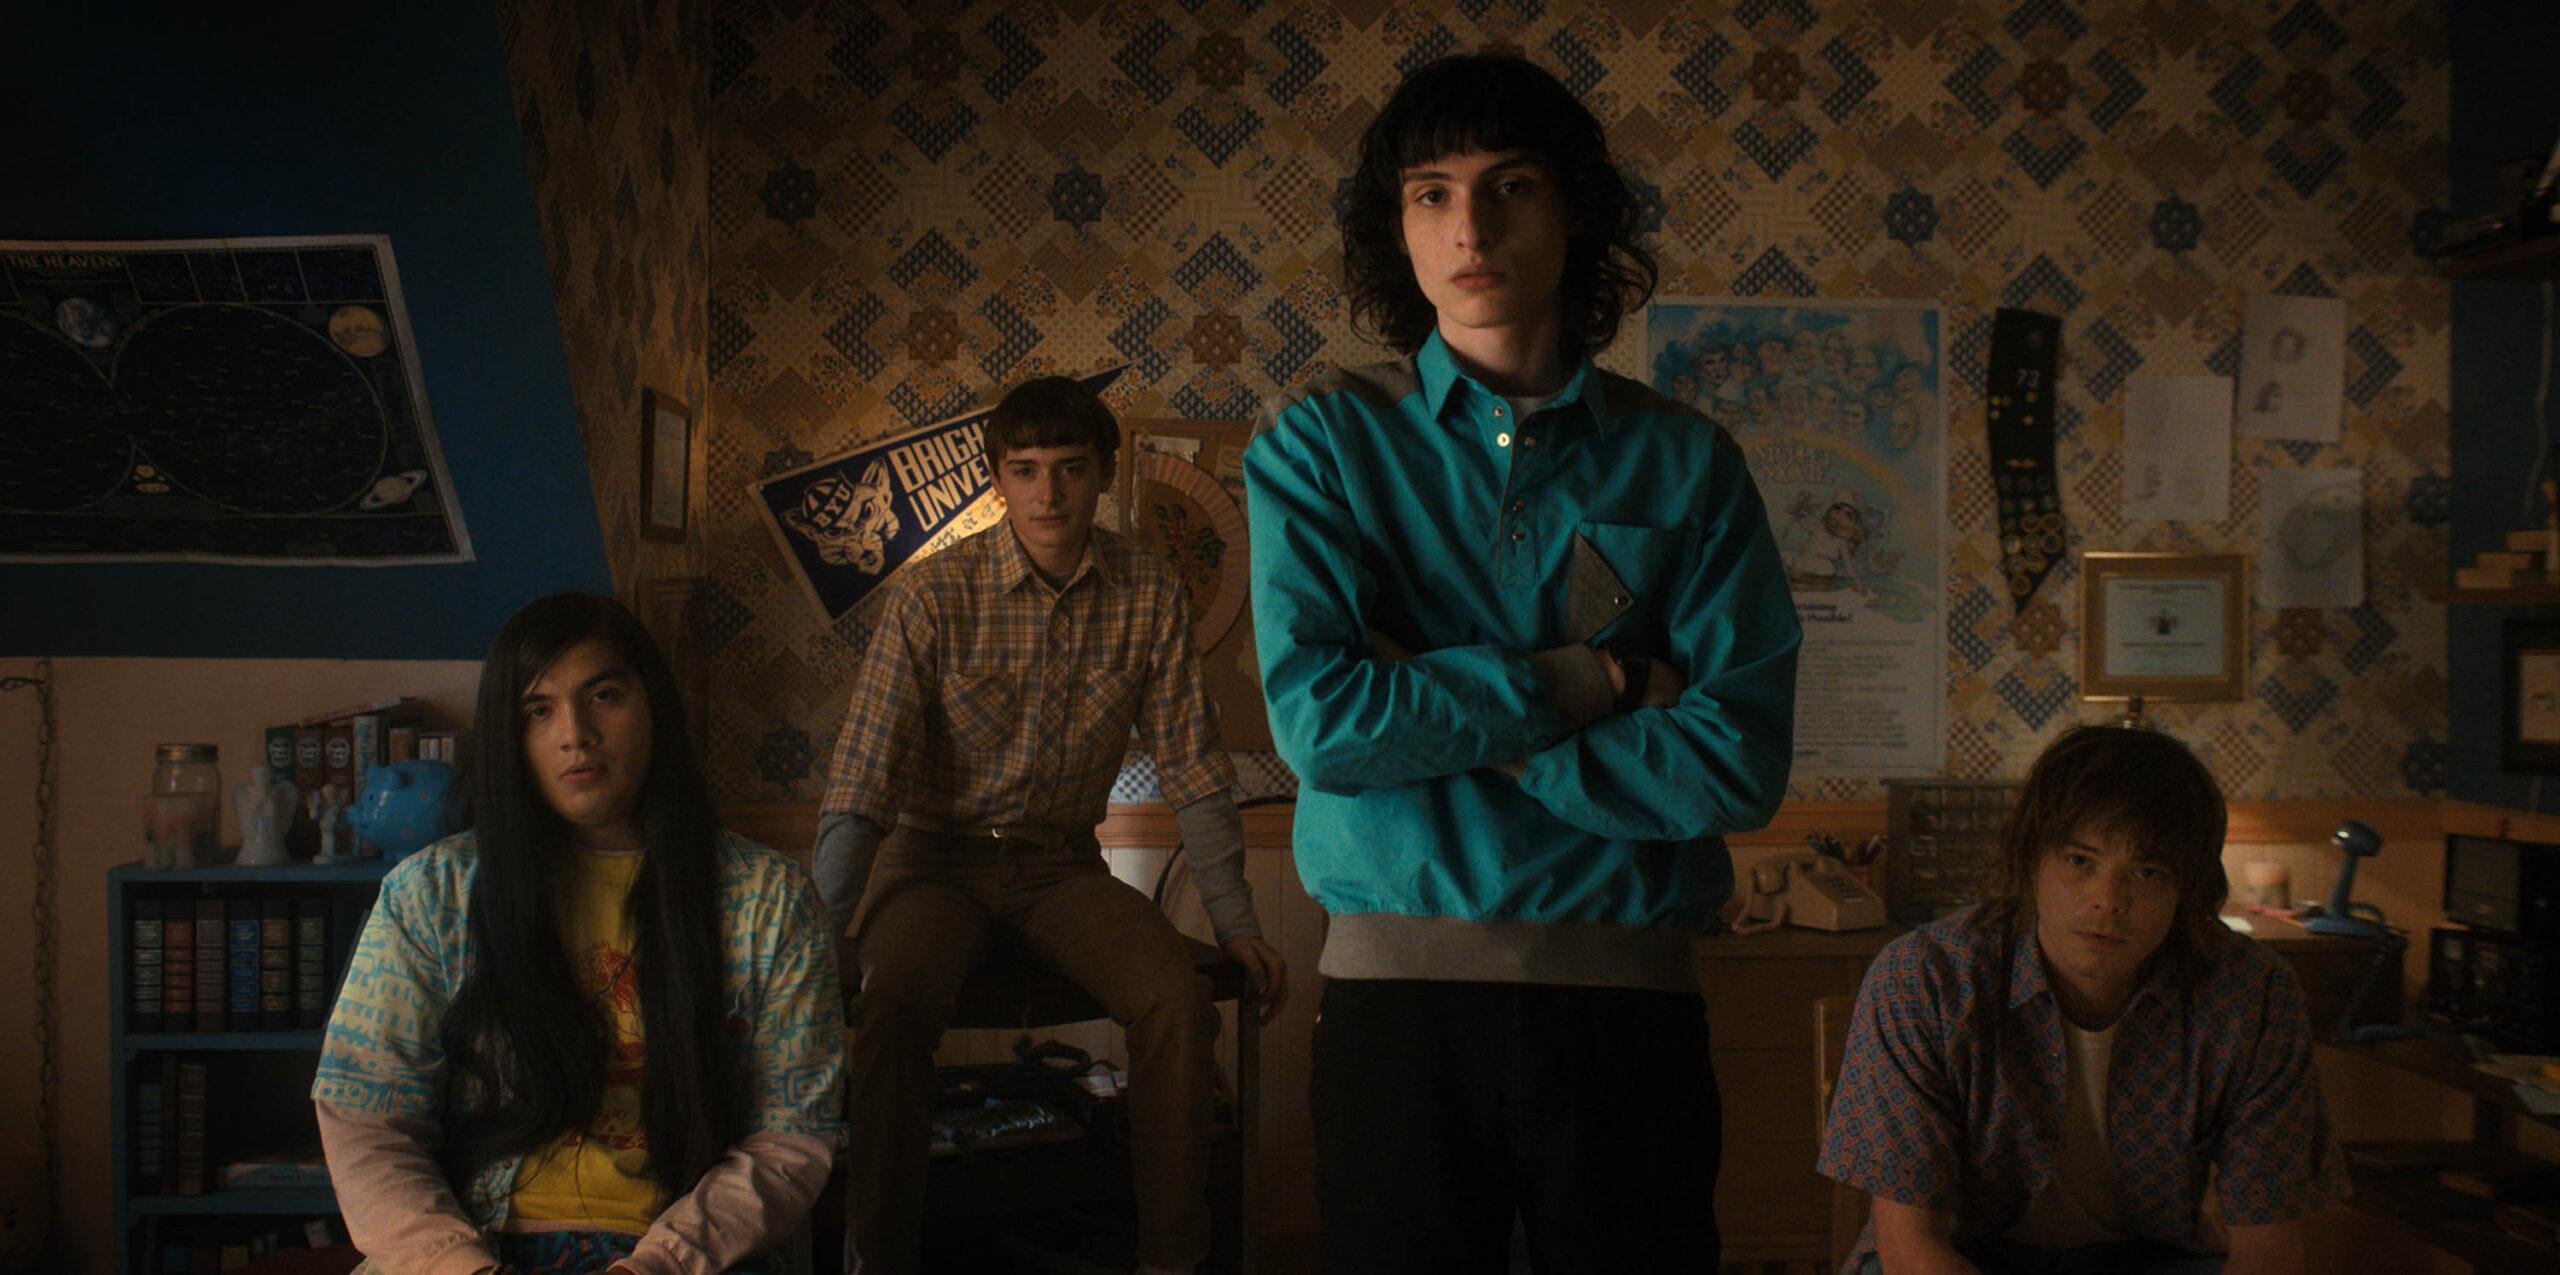 (S-D) Eduardo Franco come Argyle, Noah Schnapp come Will Byers, Finn Wolfhard come Mike Wheeler e Charlie Heaton come Jonathan Byers in Stranger Things (stagione 4) [credit: Copyright 2022 Netflix, Inc; courtesy of Netflix]